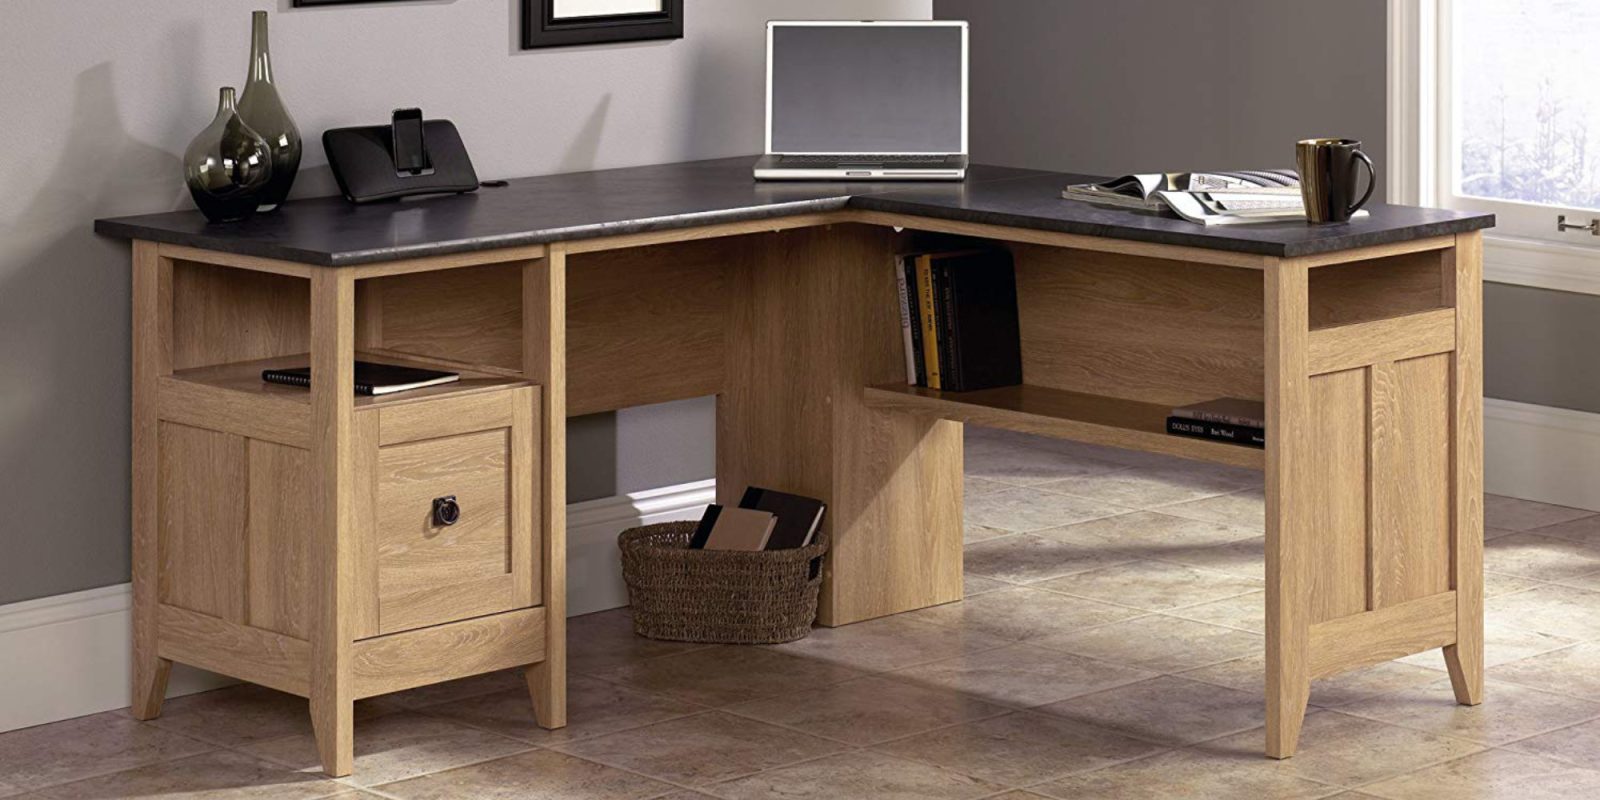 Give Yourself More Room To Work With Sauder S L Shaped Desk 158